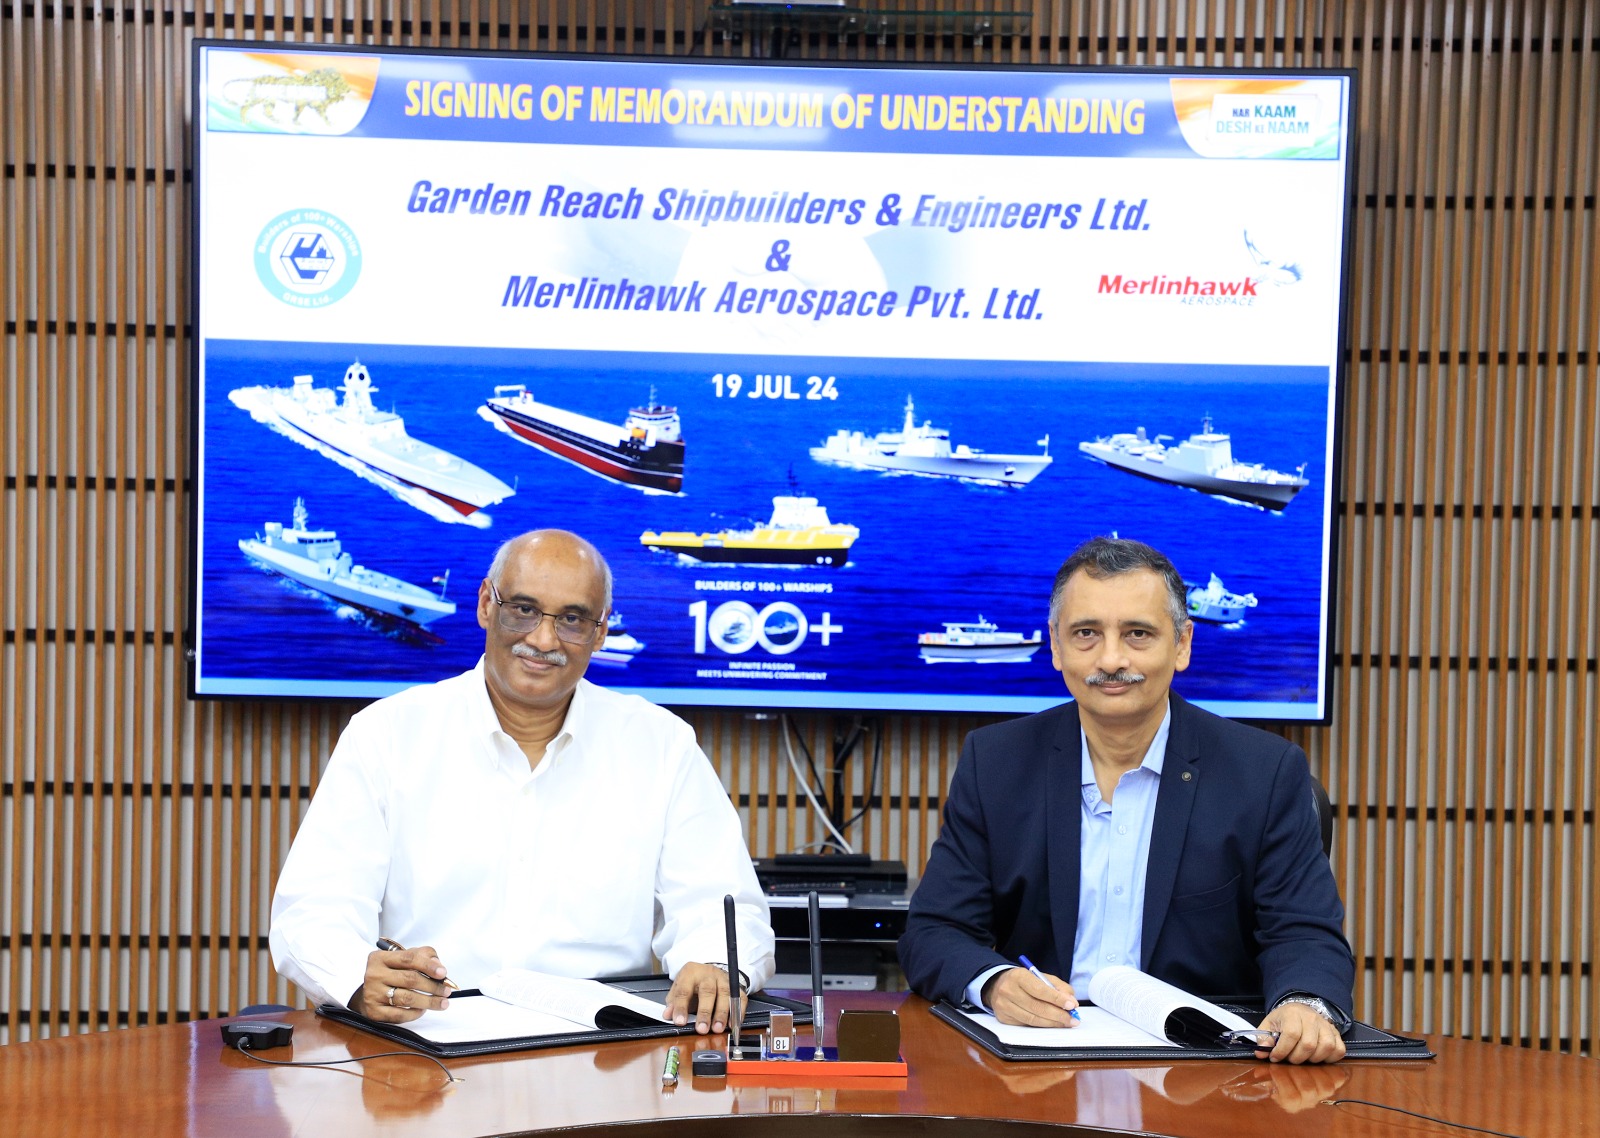 Empowering Aatmanirbhar Bharat: GRSE signs MOU with M/s Merlinhawk Aerospace for Strategic Projects on 22 Jul 24 - Thumbnail